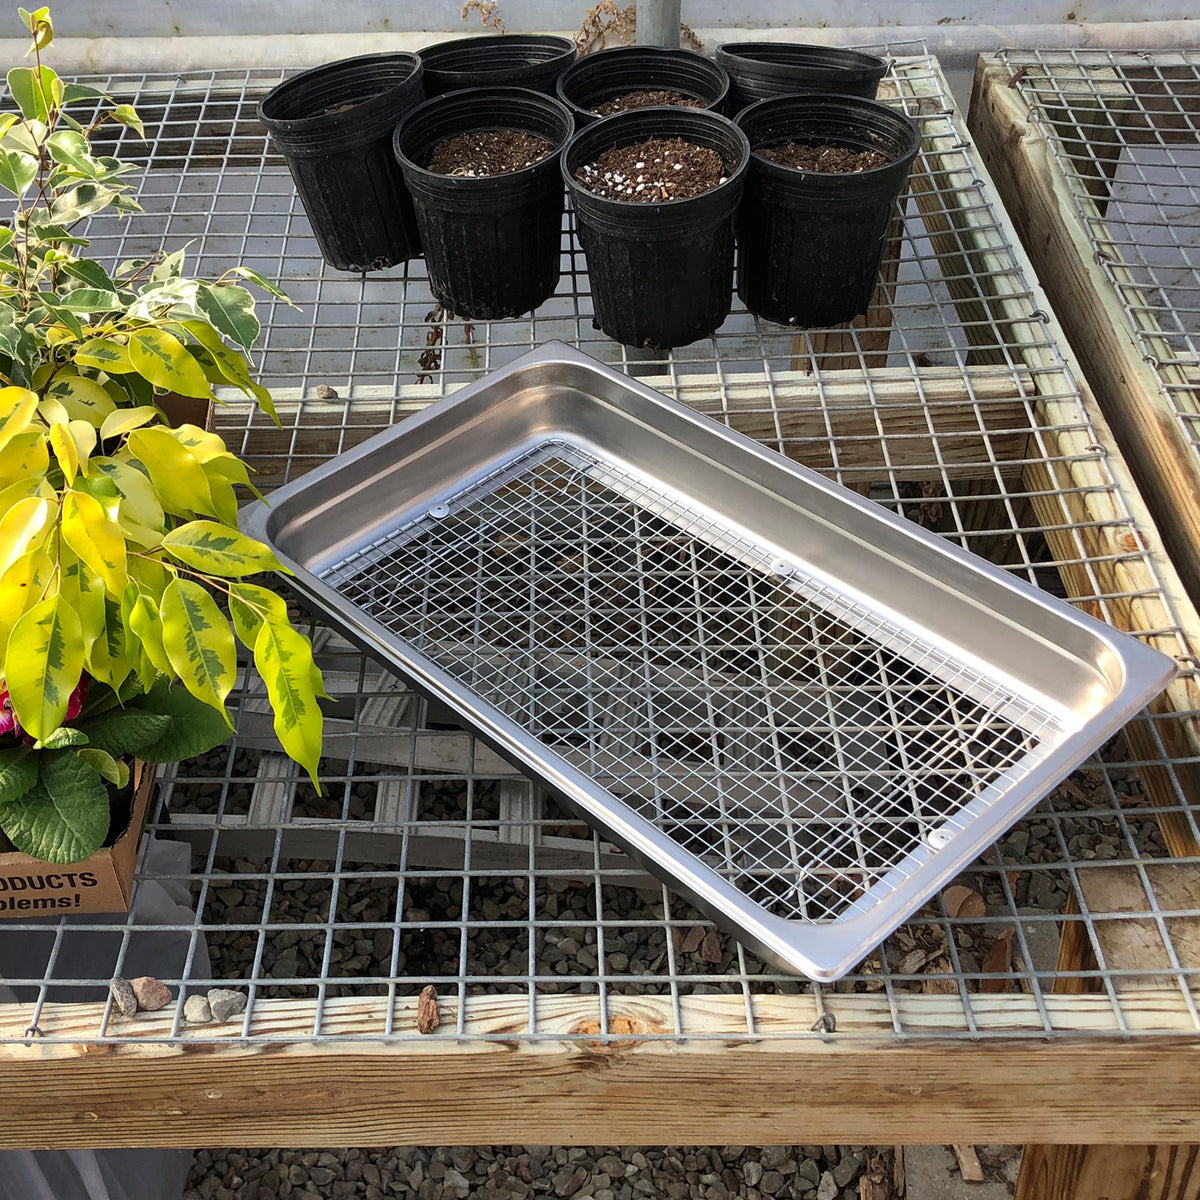 Stainless Garden Sifter - Compost, Dirt and Potting Soil